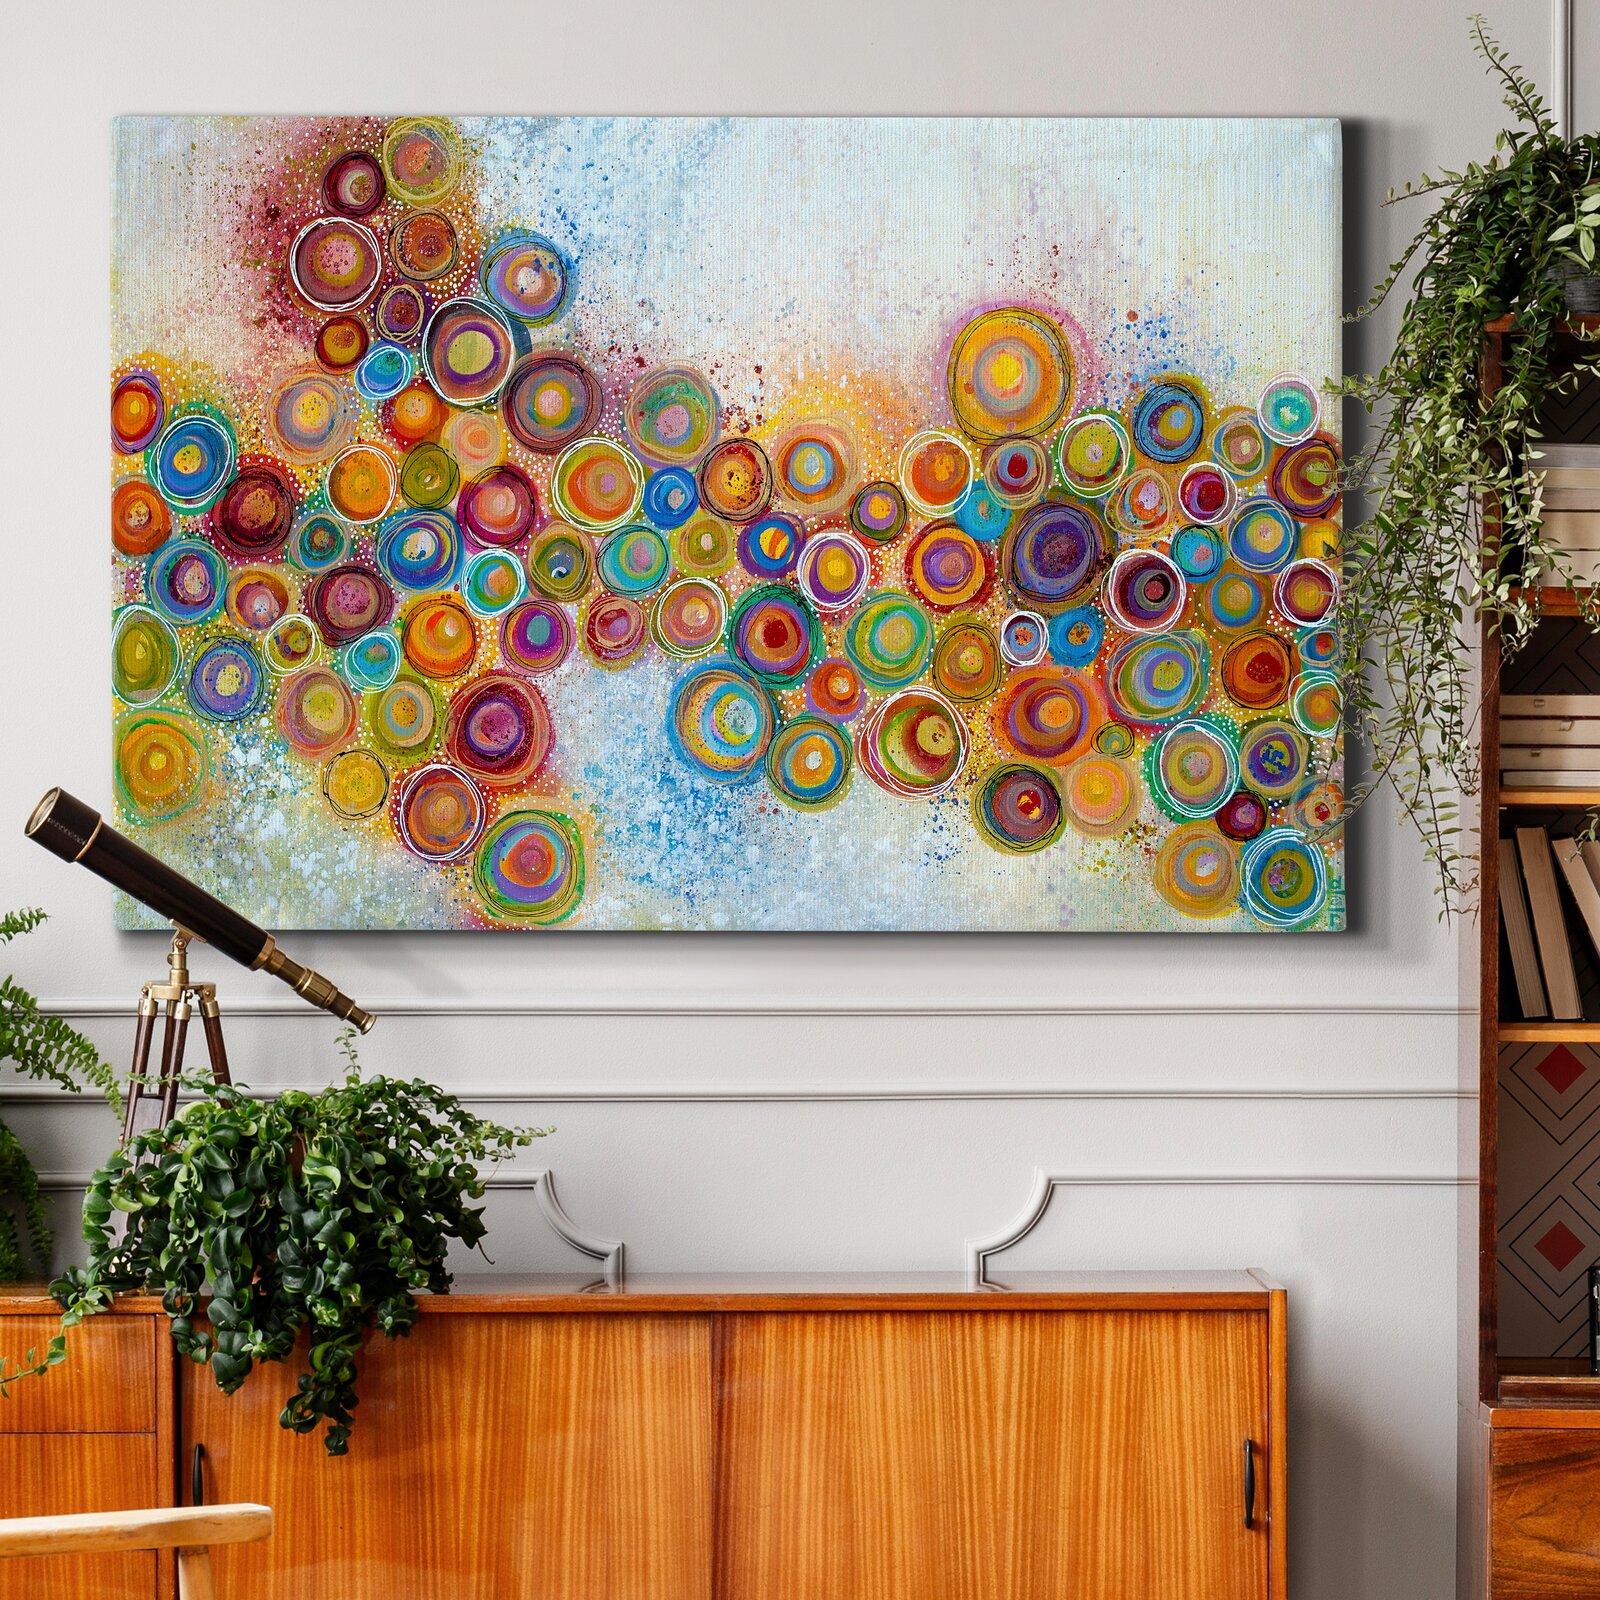 Oversized Floral Wall Art - A Garden - Wrapped Canvas Graphic Art Print